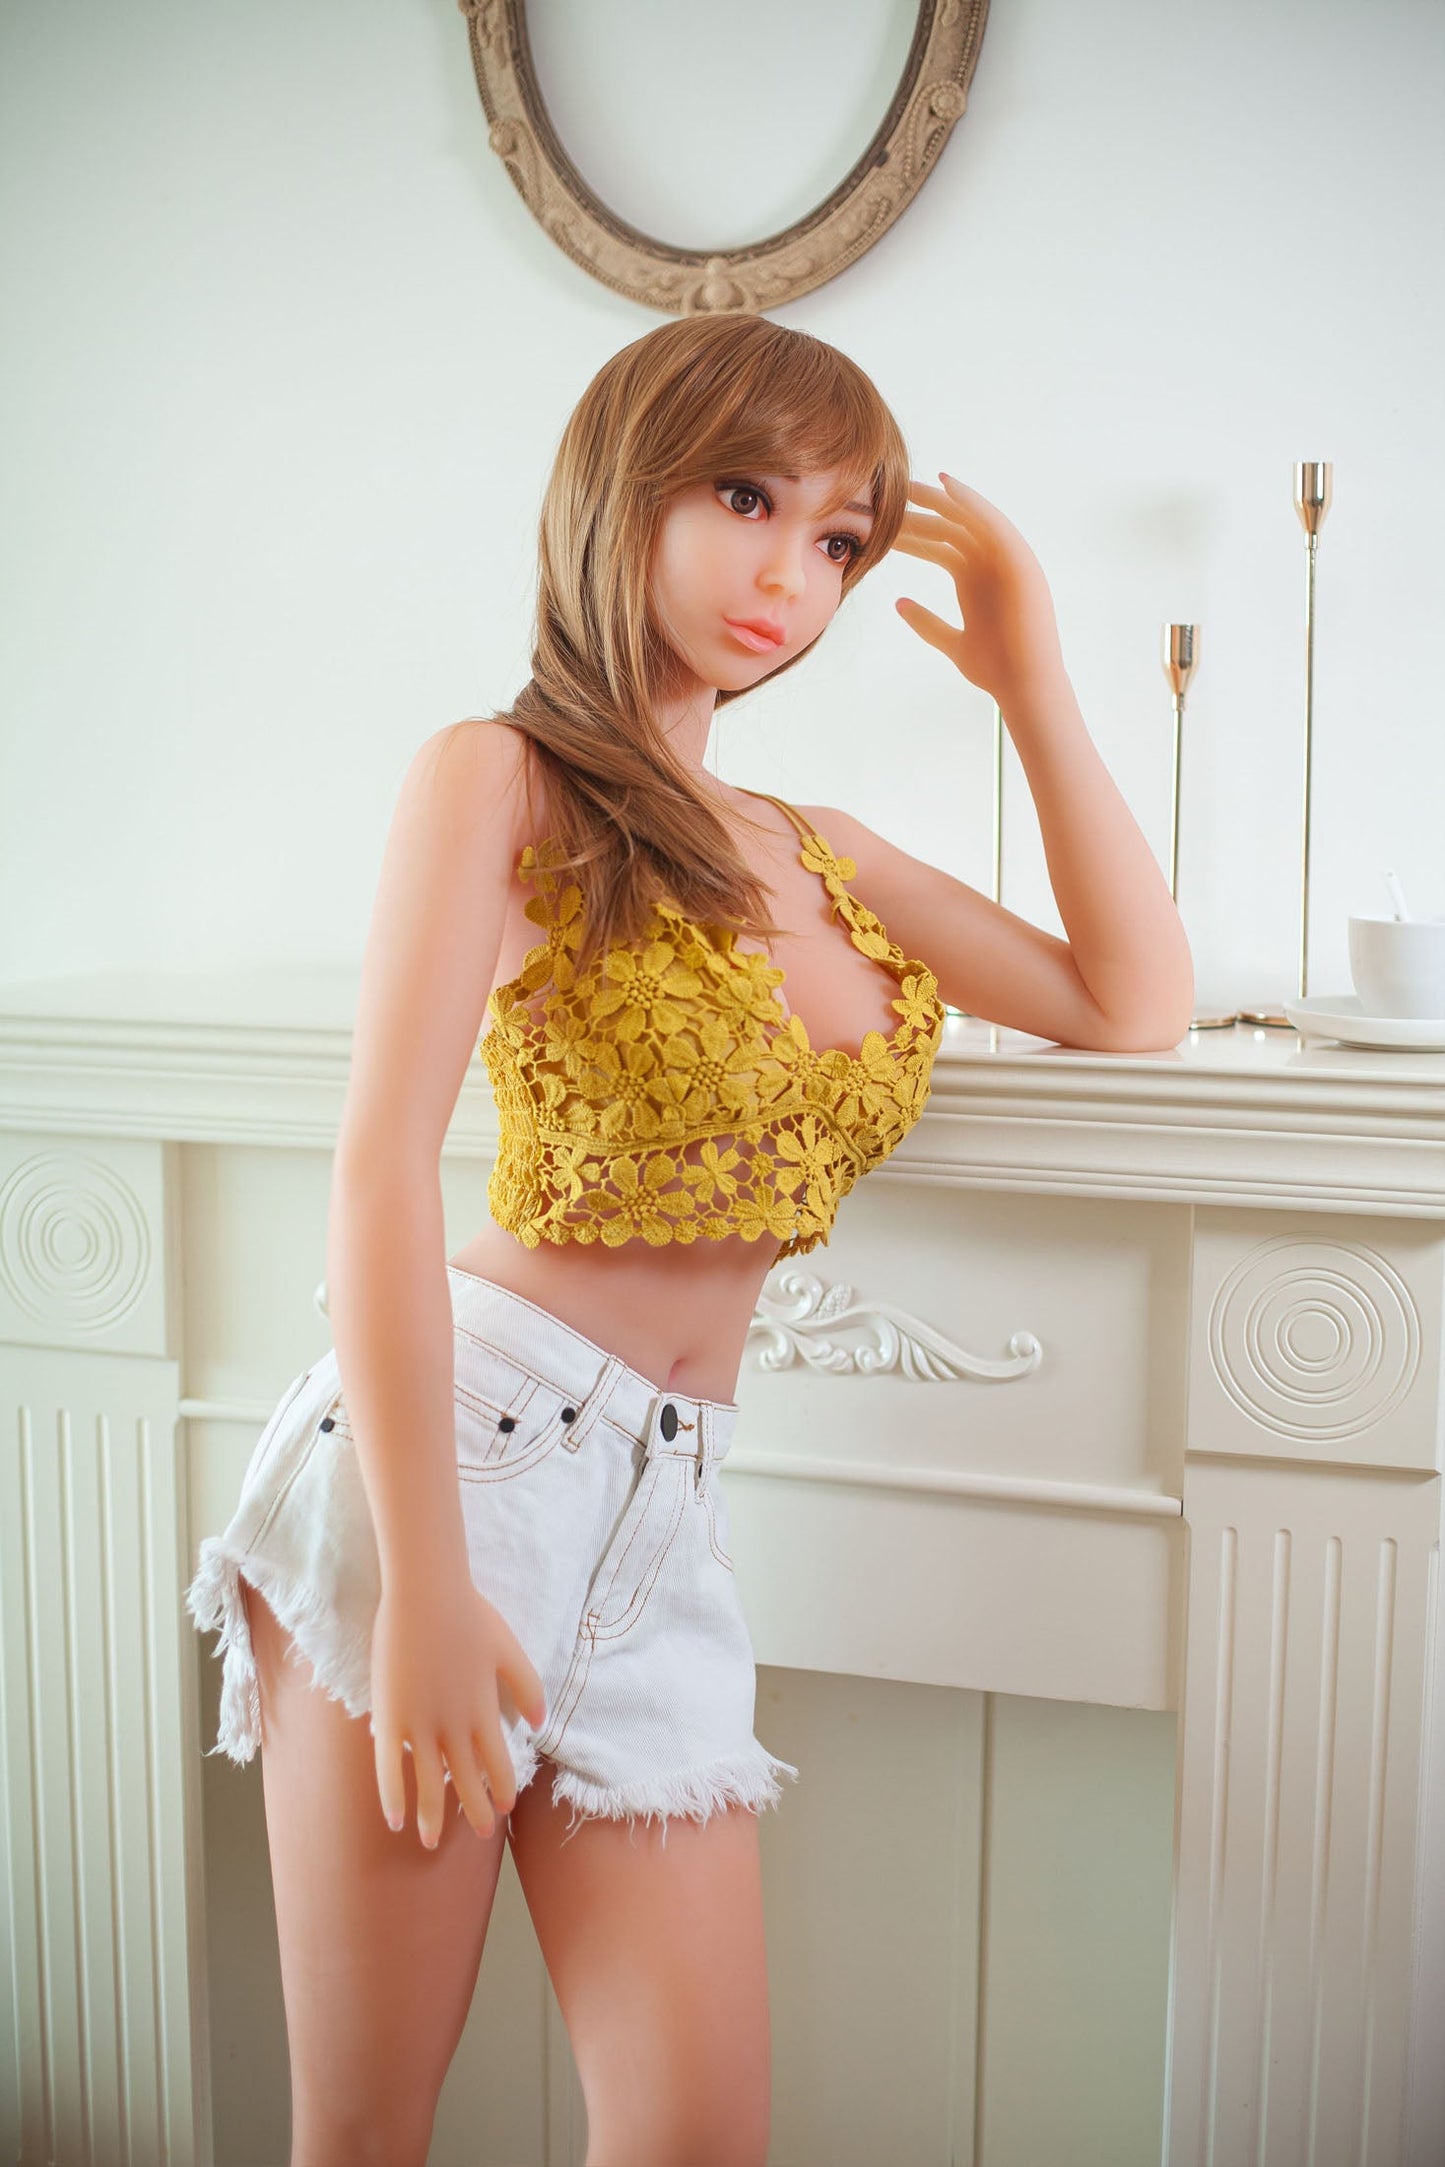 Doll Forever - Realistic Love Doll - 4ft 10in (148cm) - Amber - Love Dolls 4U